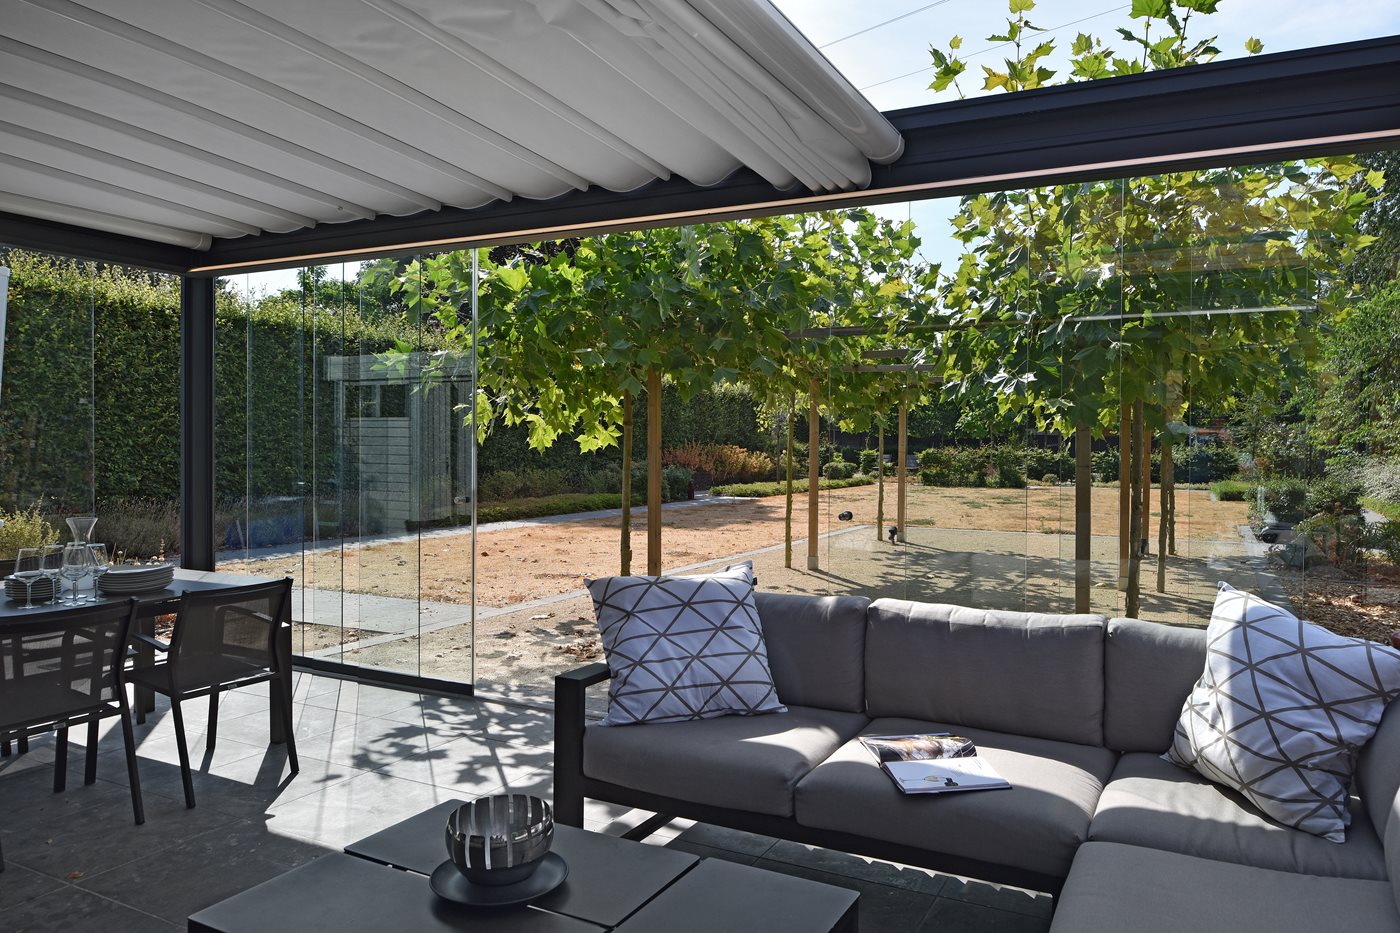 Shade and energy saving: Corradi's solutions to regulate light and create comfort spaces